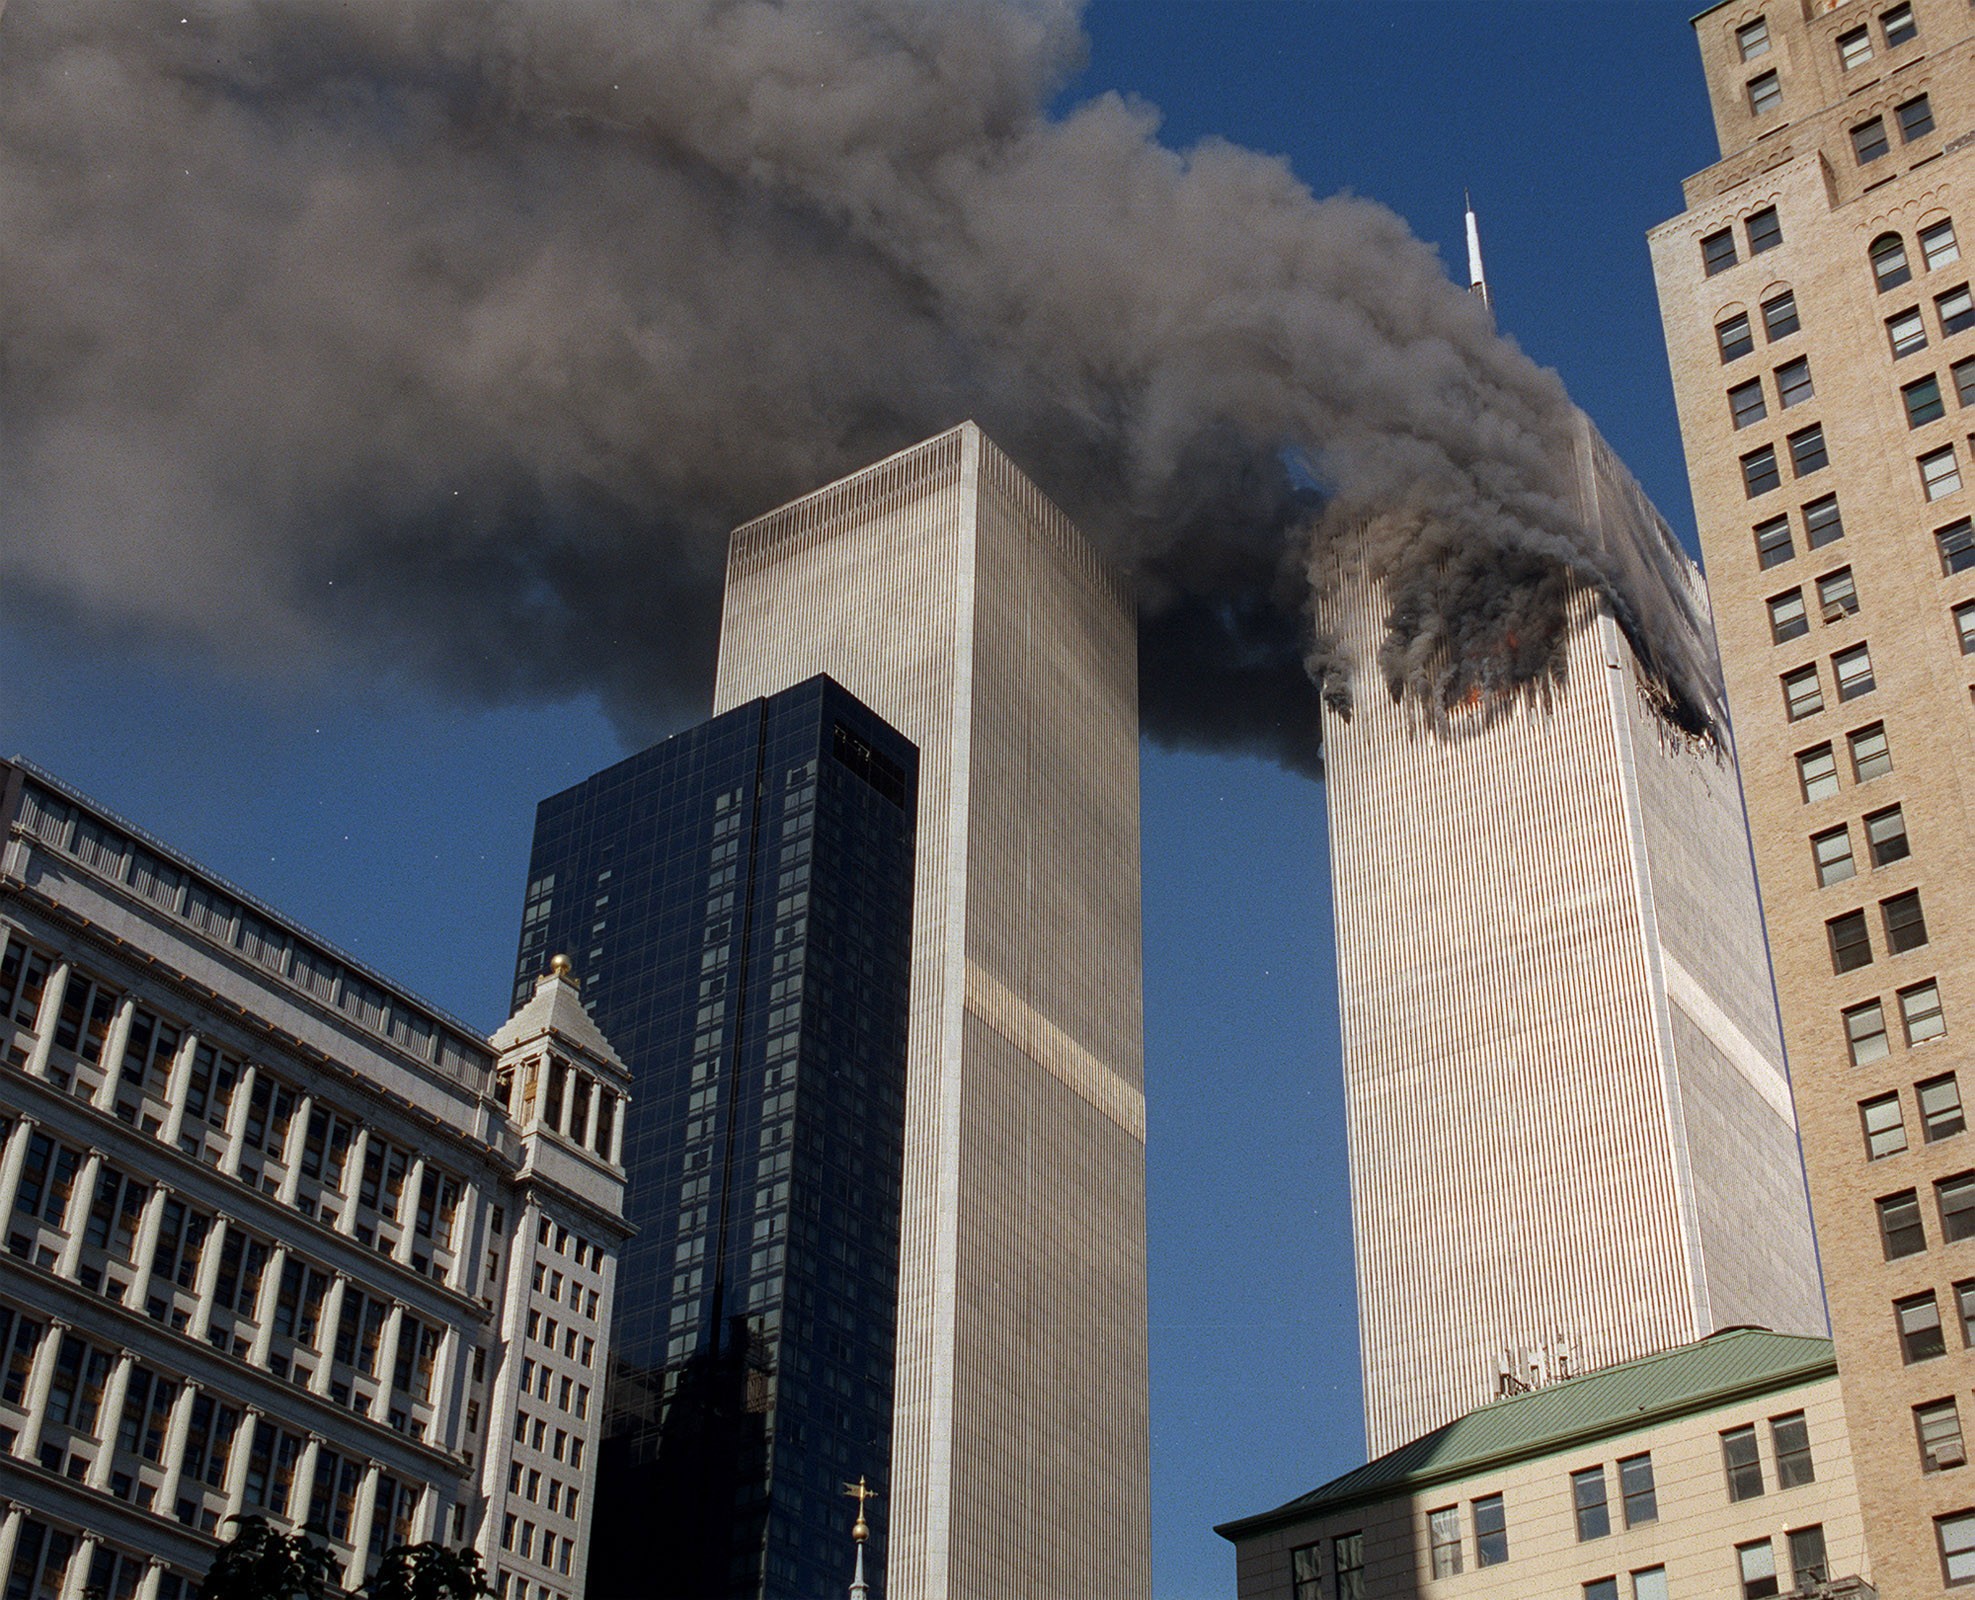 Smoke pours from one of the towers of the World Trade Centre on September 11, 2001. Photo: AP